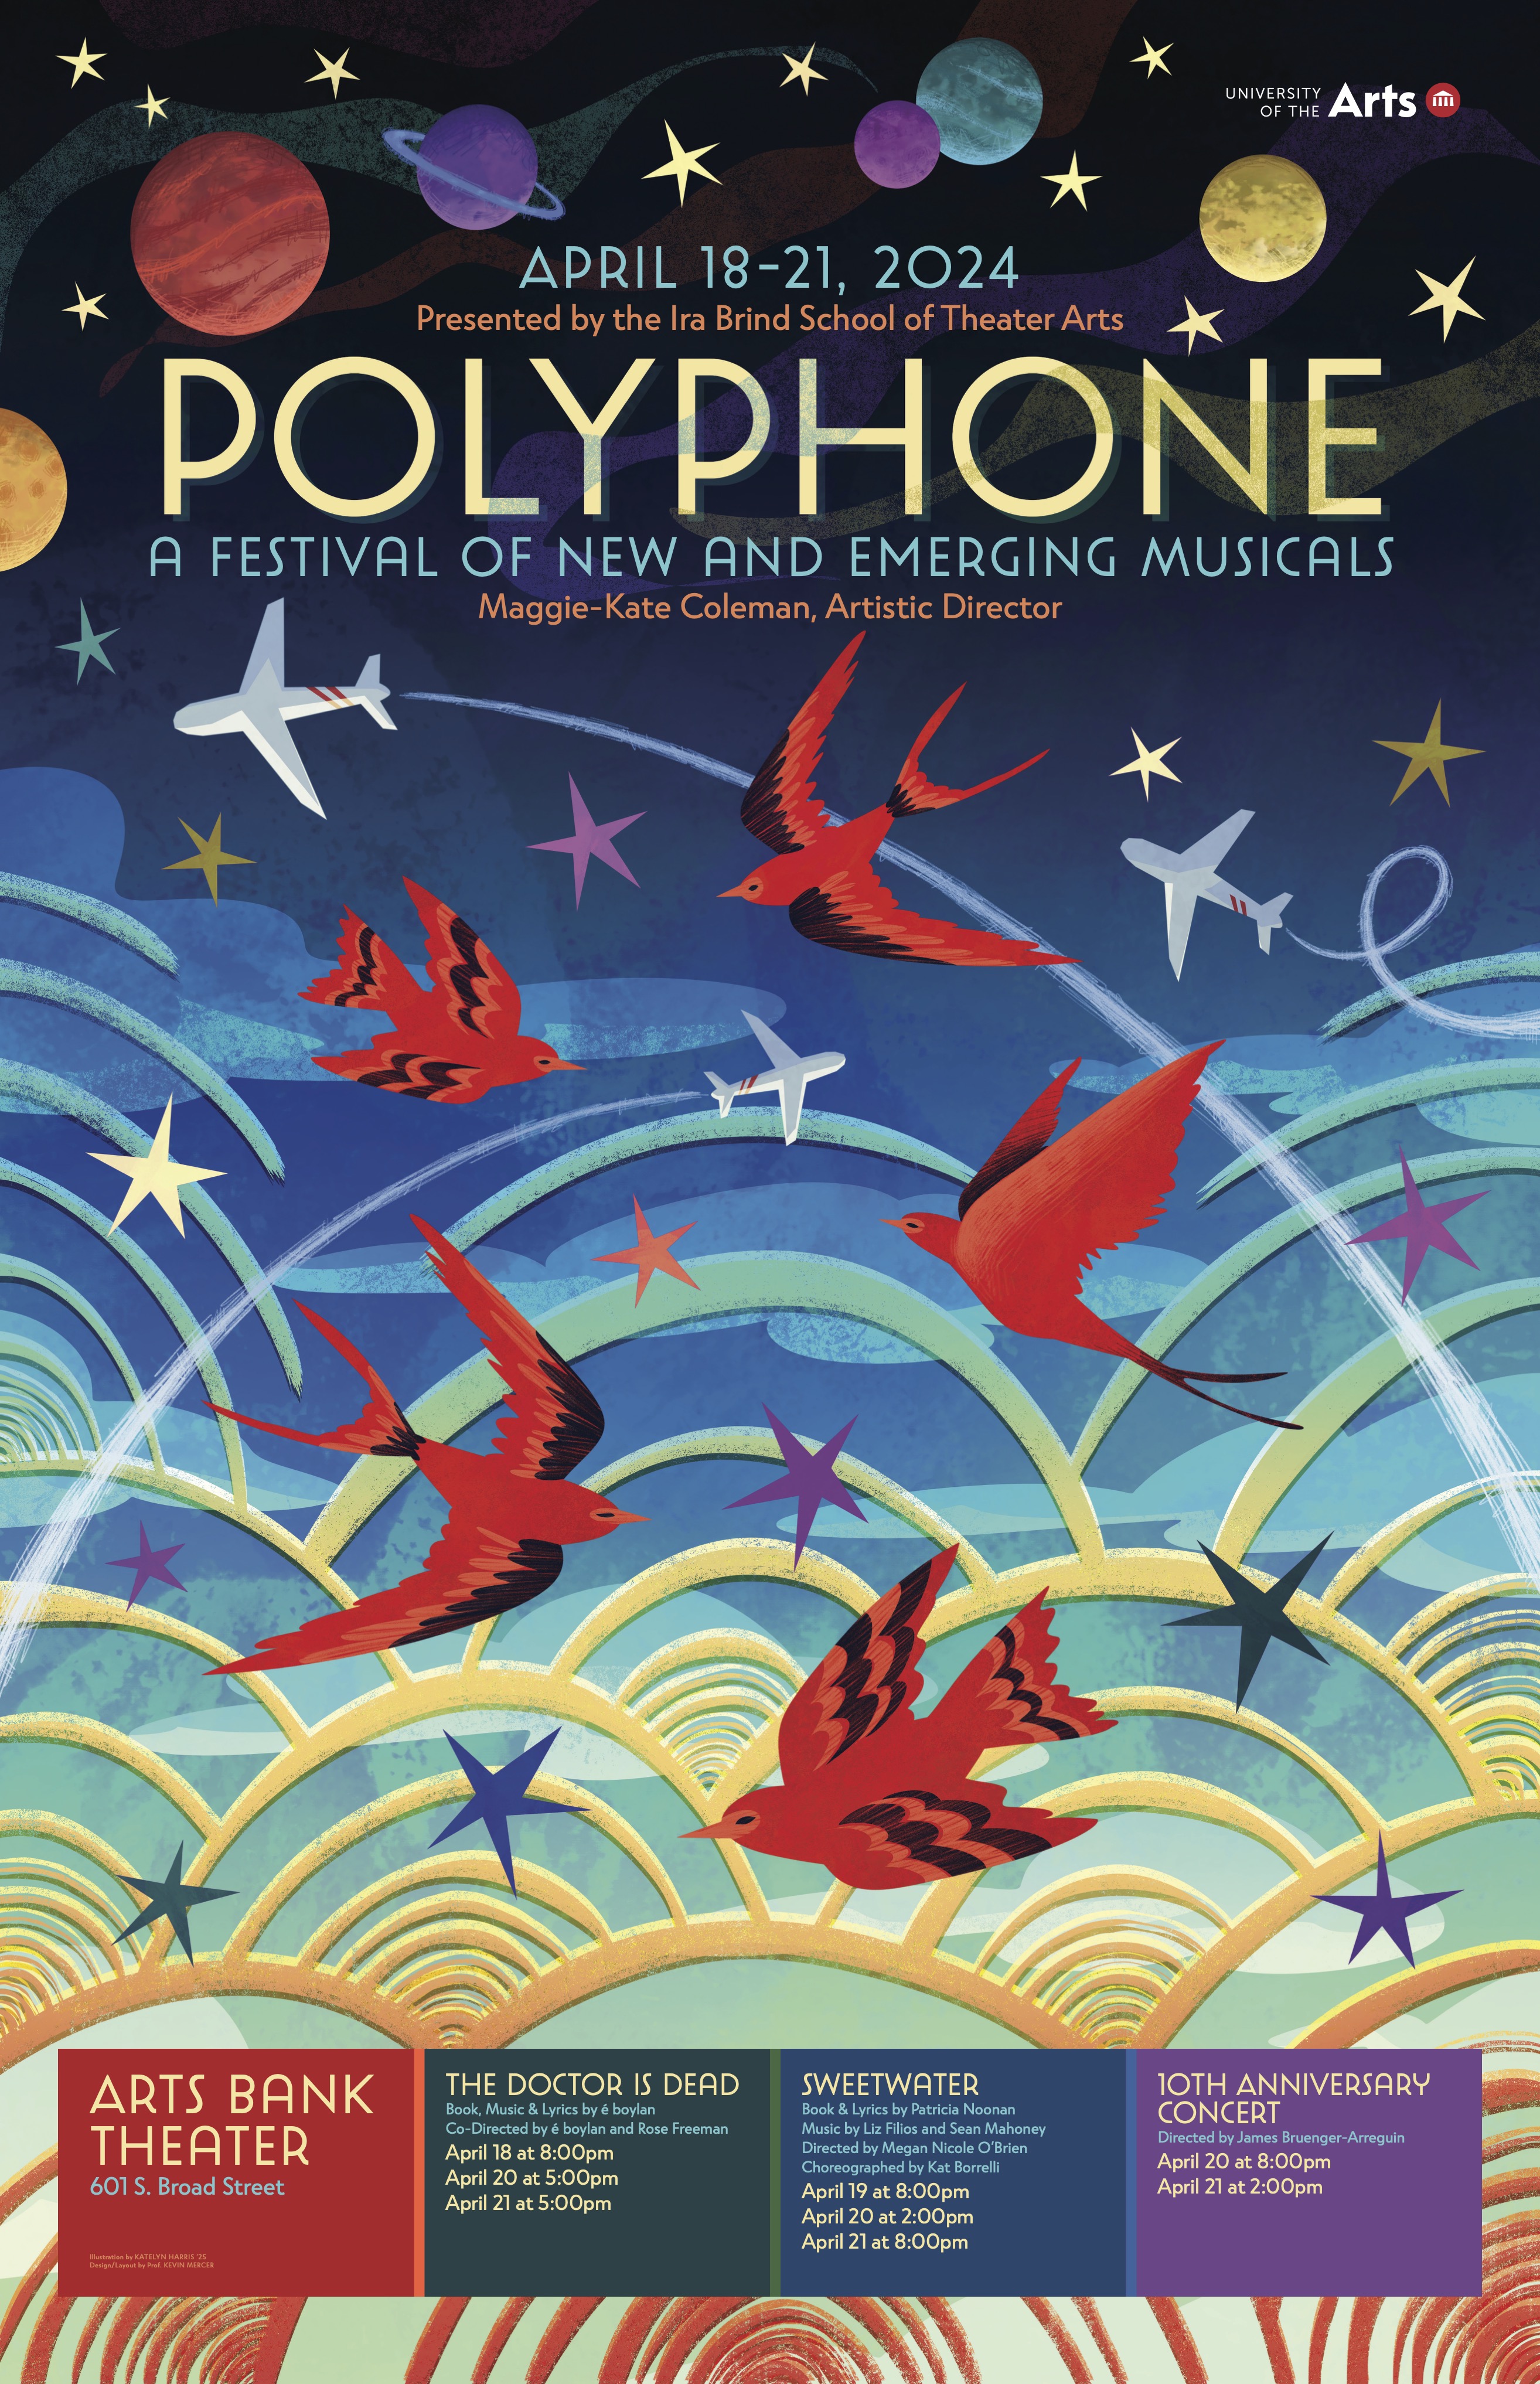  An illustration of a blue sky filled with red birds, airplanes, and multi-color stars in the foreground. In the background are clouds, and colorful arch patterns in yellow, green, and blue. The top reads “April 18–21, 2024, Presented by the Ira Brind School of Theater Arts, Polyphone A Festival of New and Emerging Musicals, Maggie-Kate Coleman, Artistic Director”. The bottom reads “Arts Bank Theater 601 S. Broad Street” along with the names of each production in the festival as found on the webpage below. 